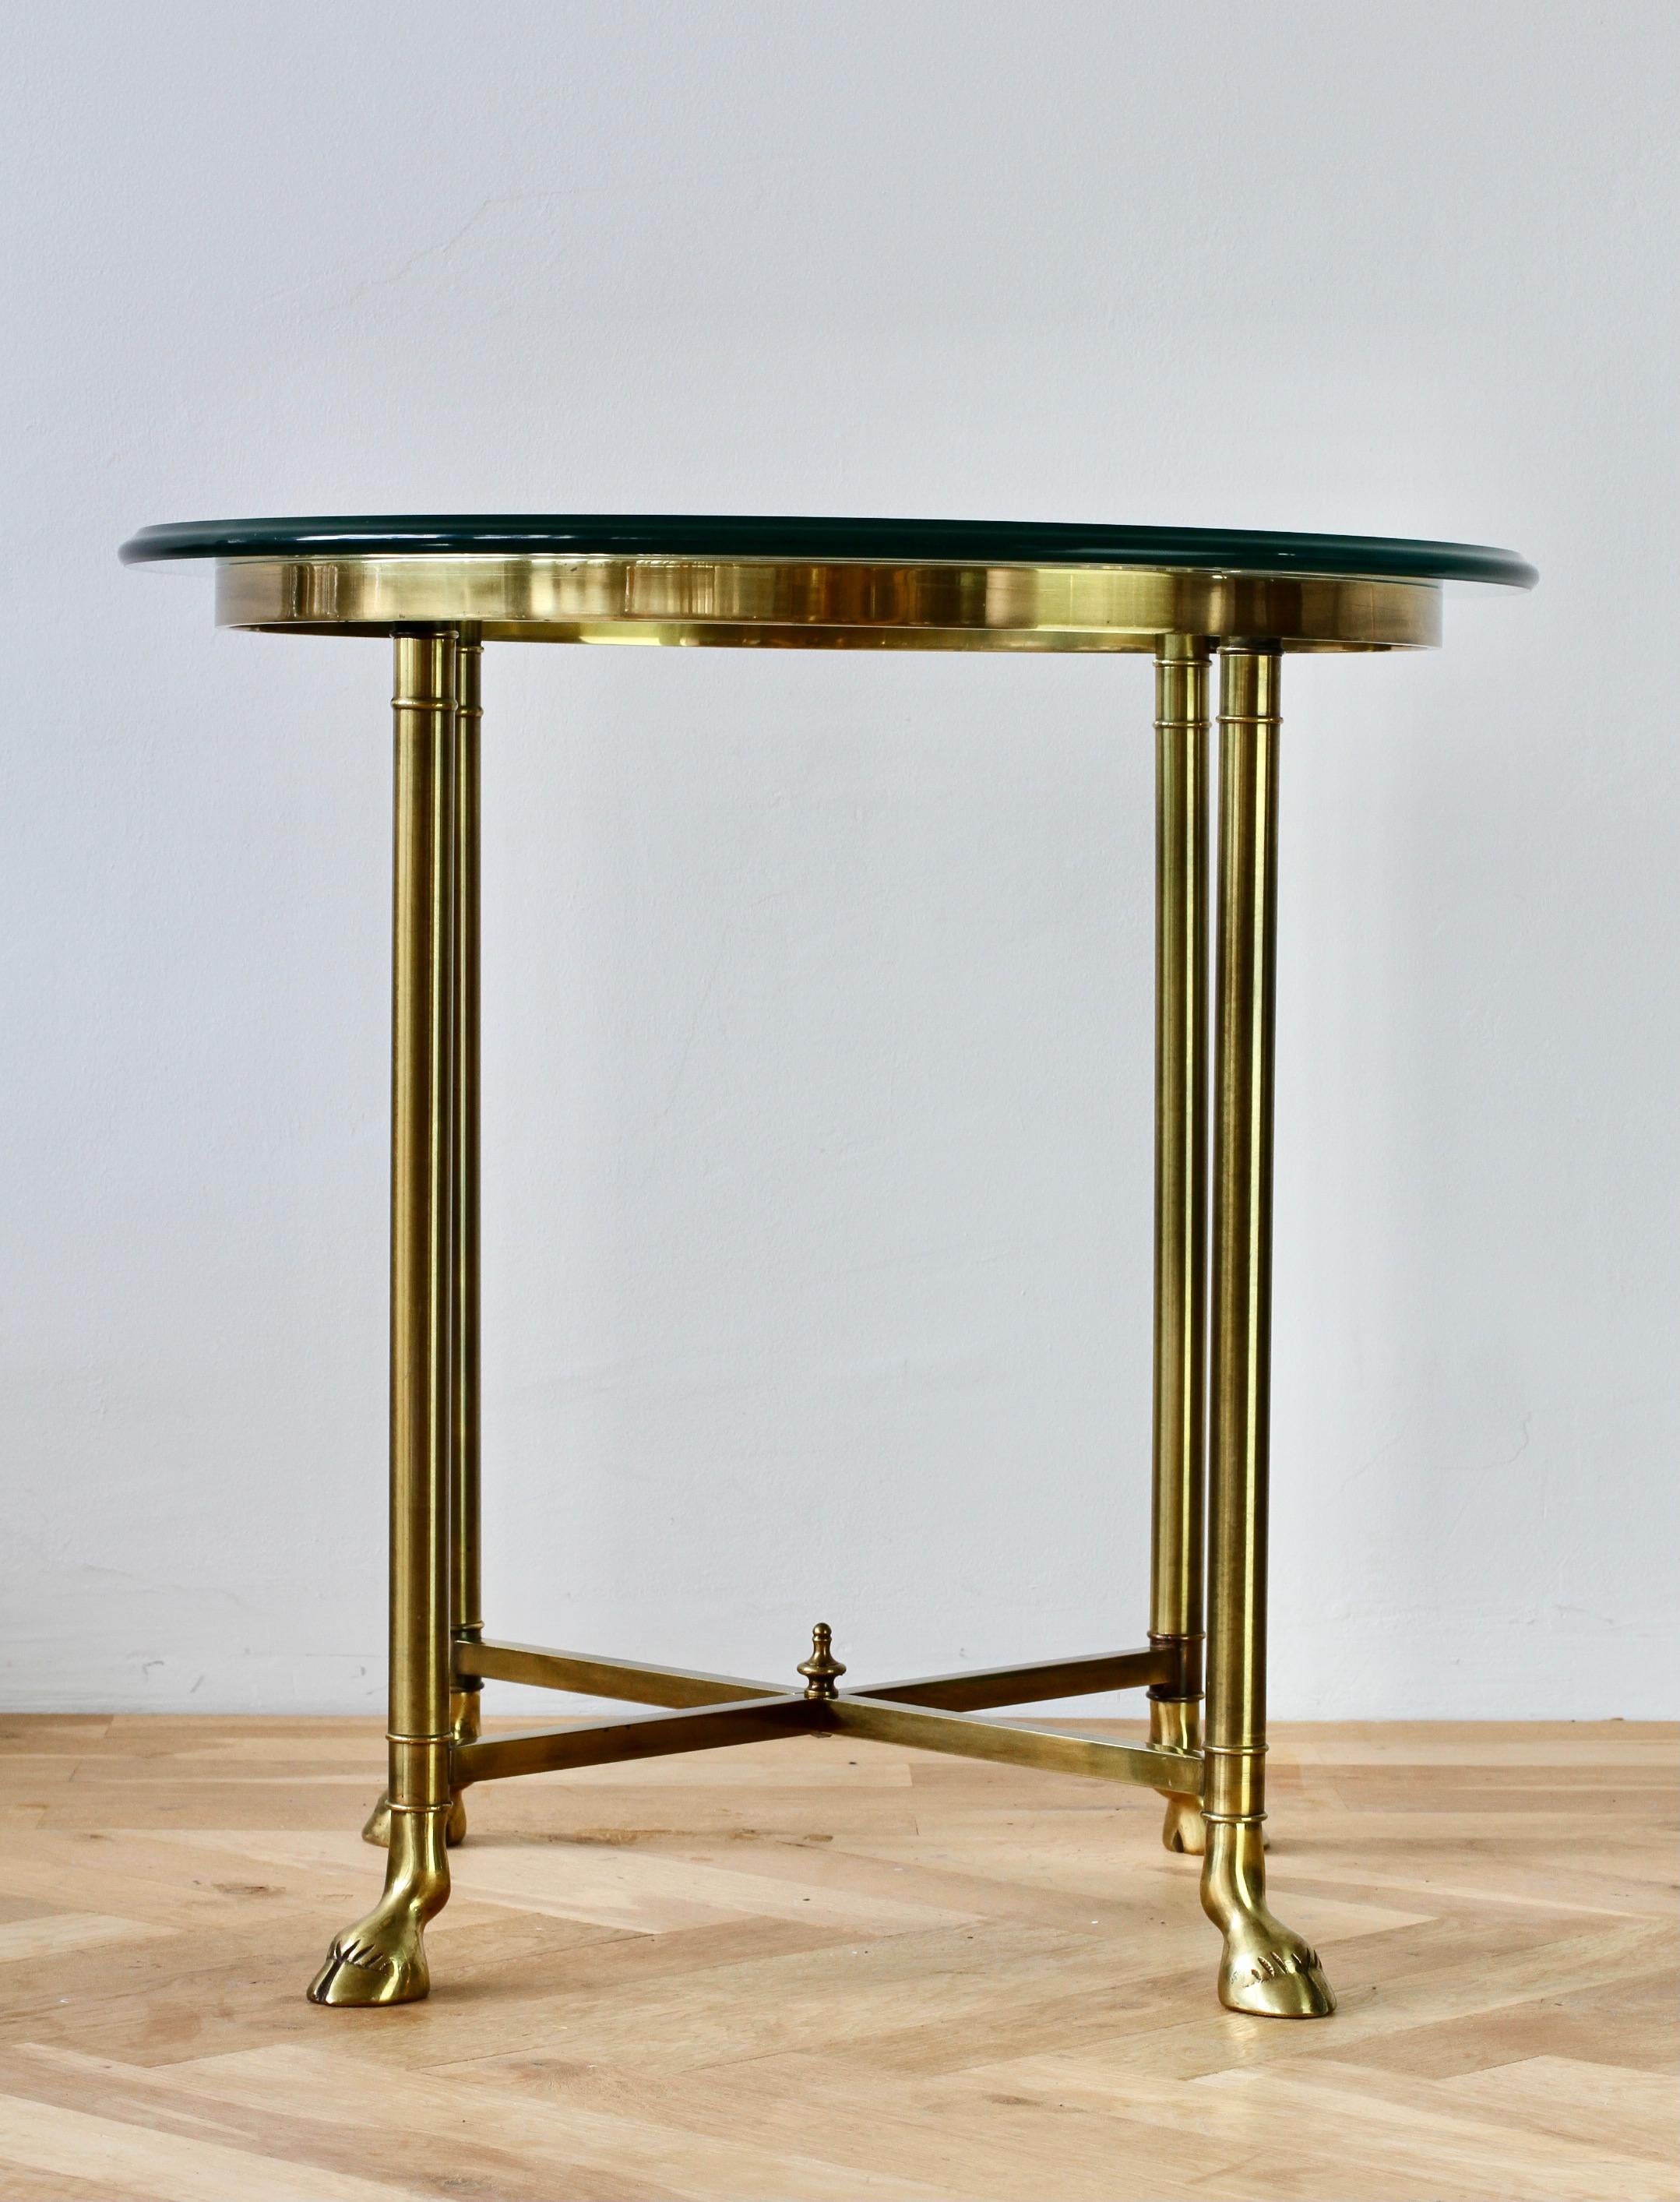 American vintage side table by La Barge in the style of French designers Maison Jansen and Maison Charles with a thick glass top in the circa 1975. Made of brass with elements cast in brass - the hoofed feet give the table an organic but also